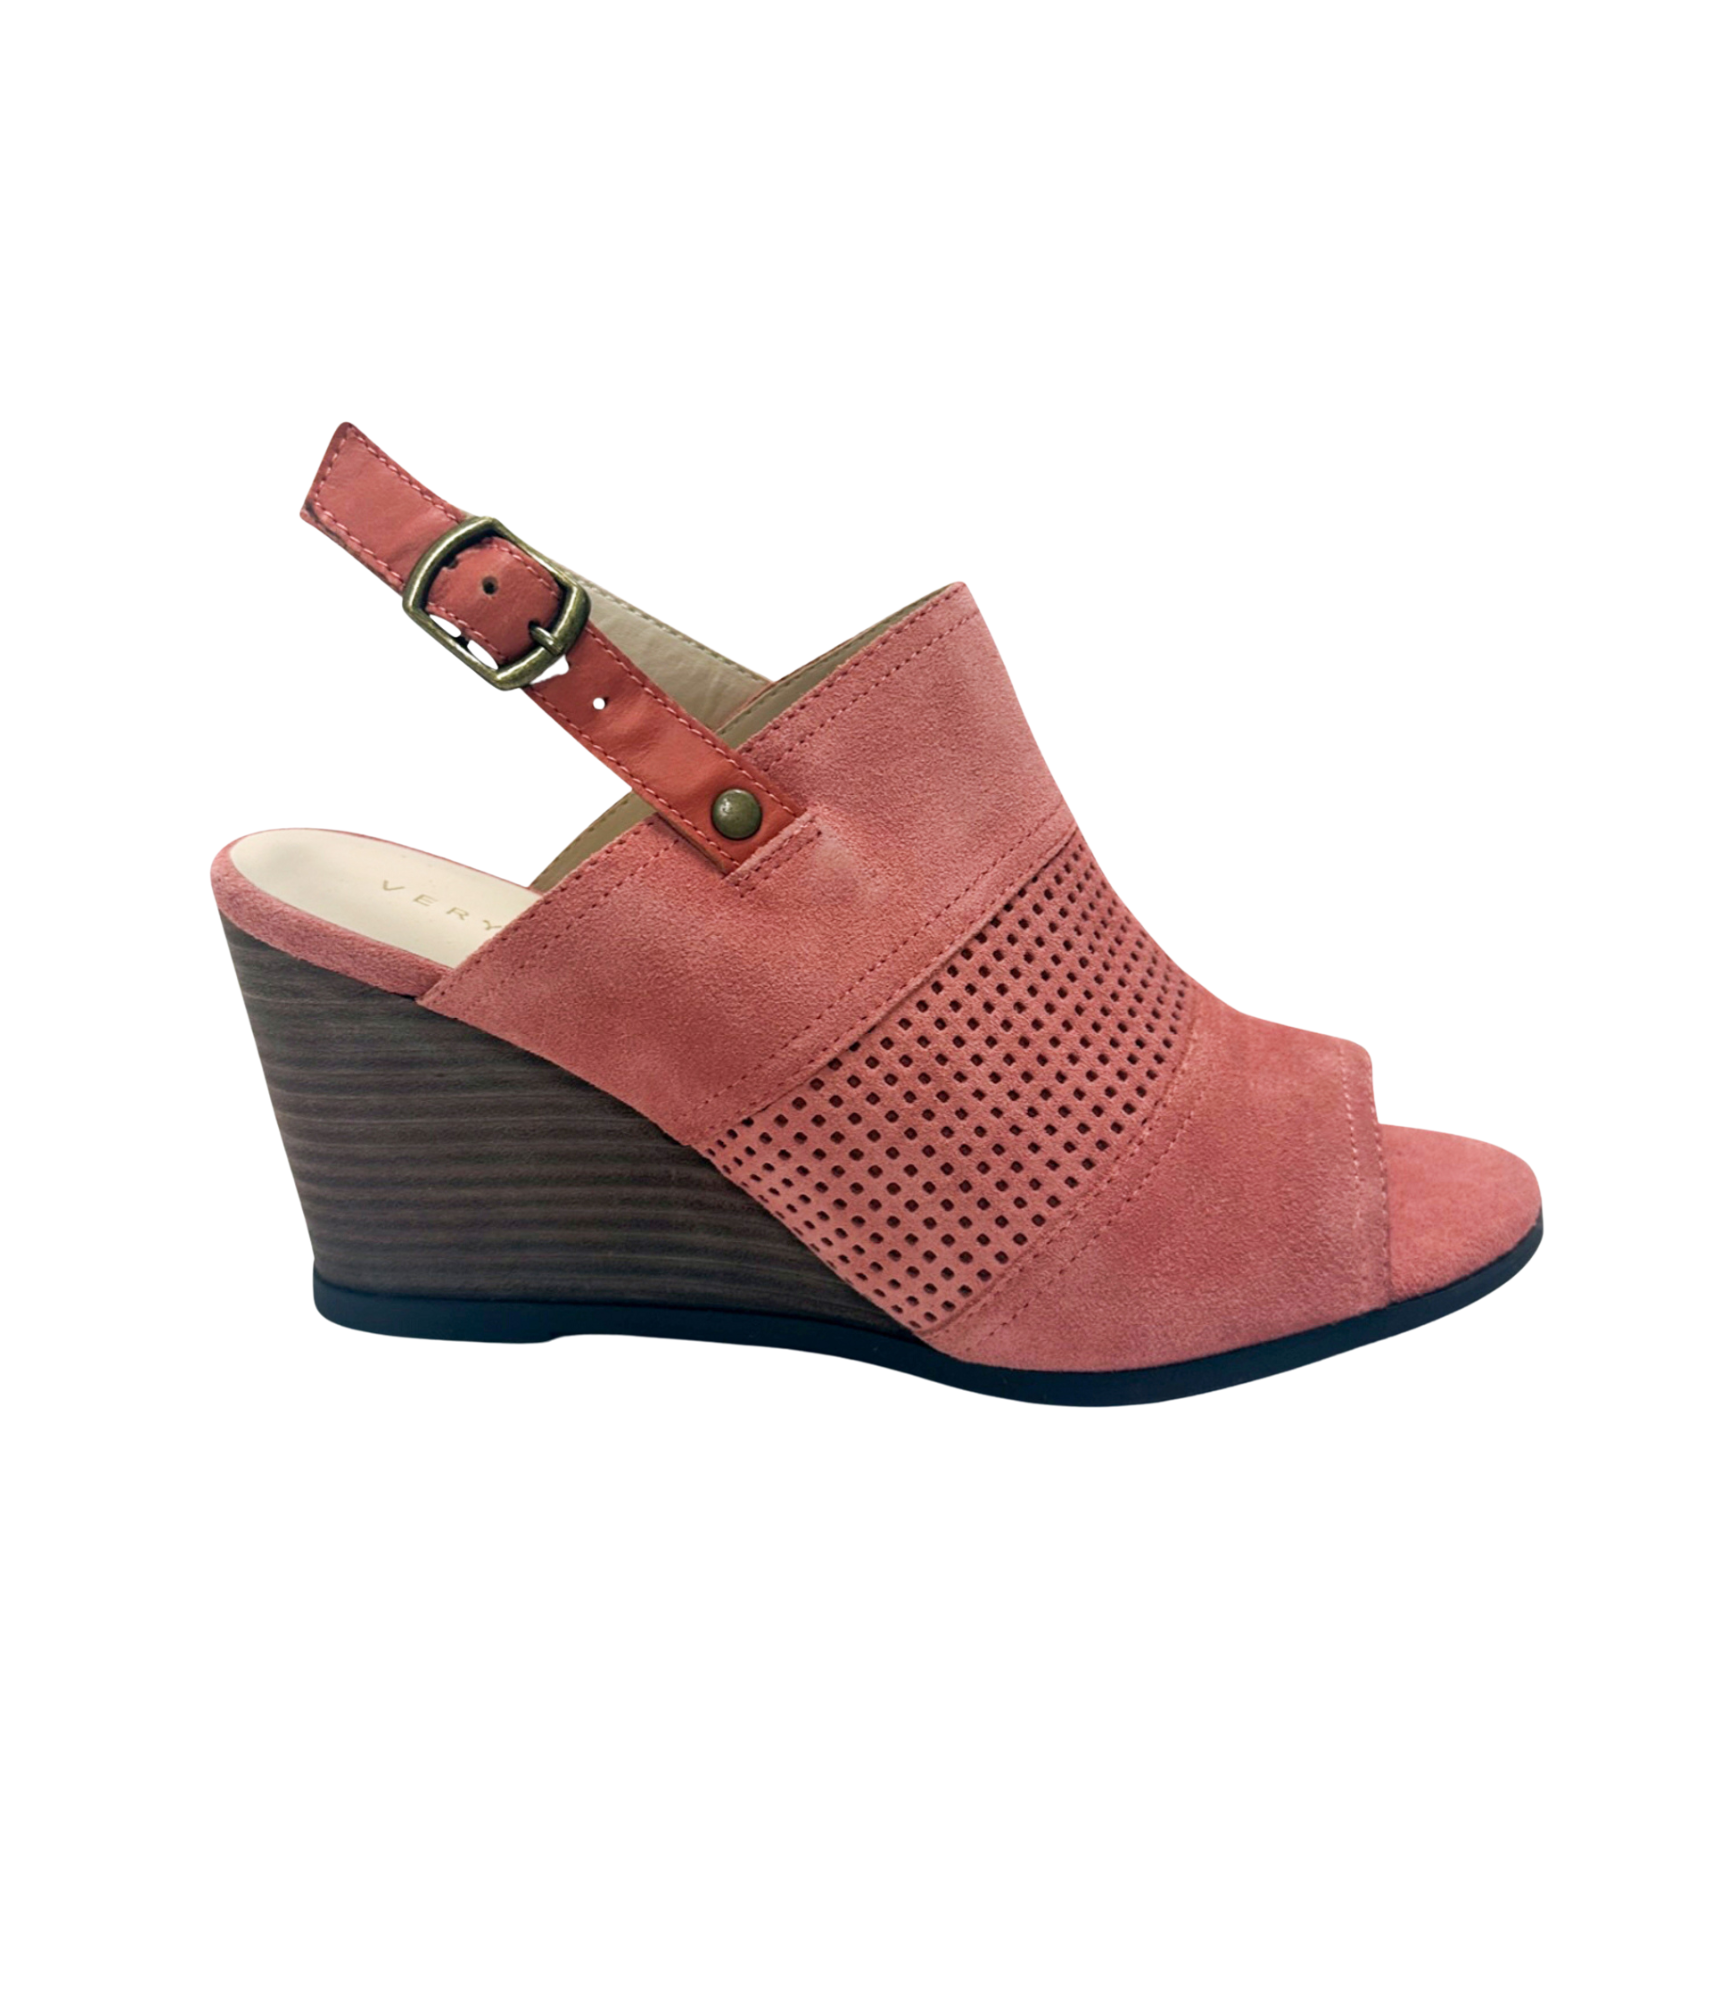 Hyde Wedges in Coral